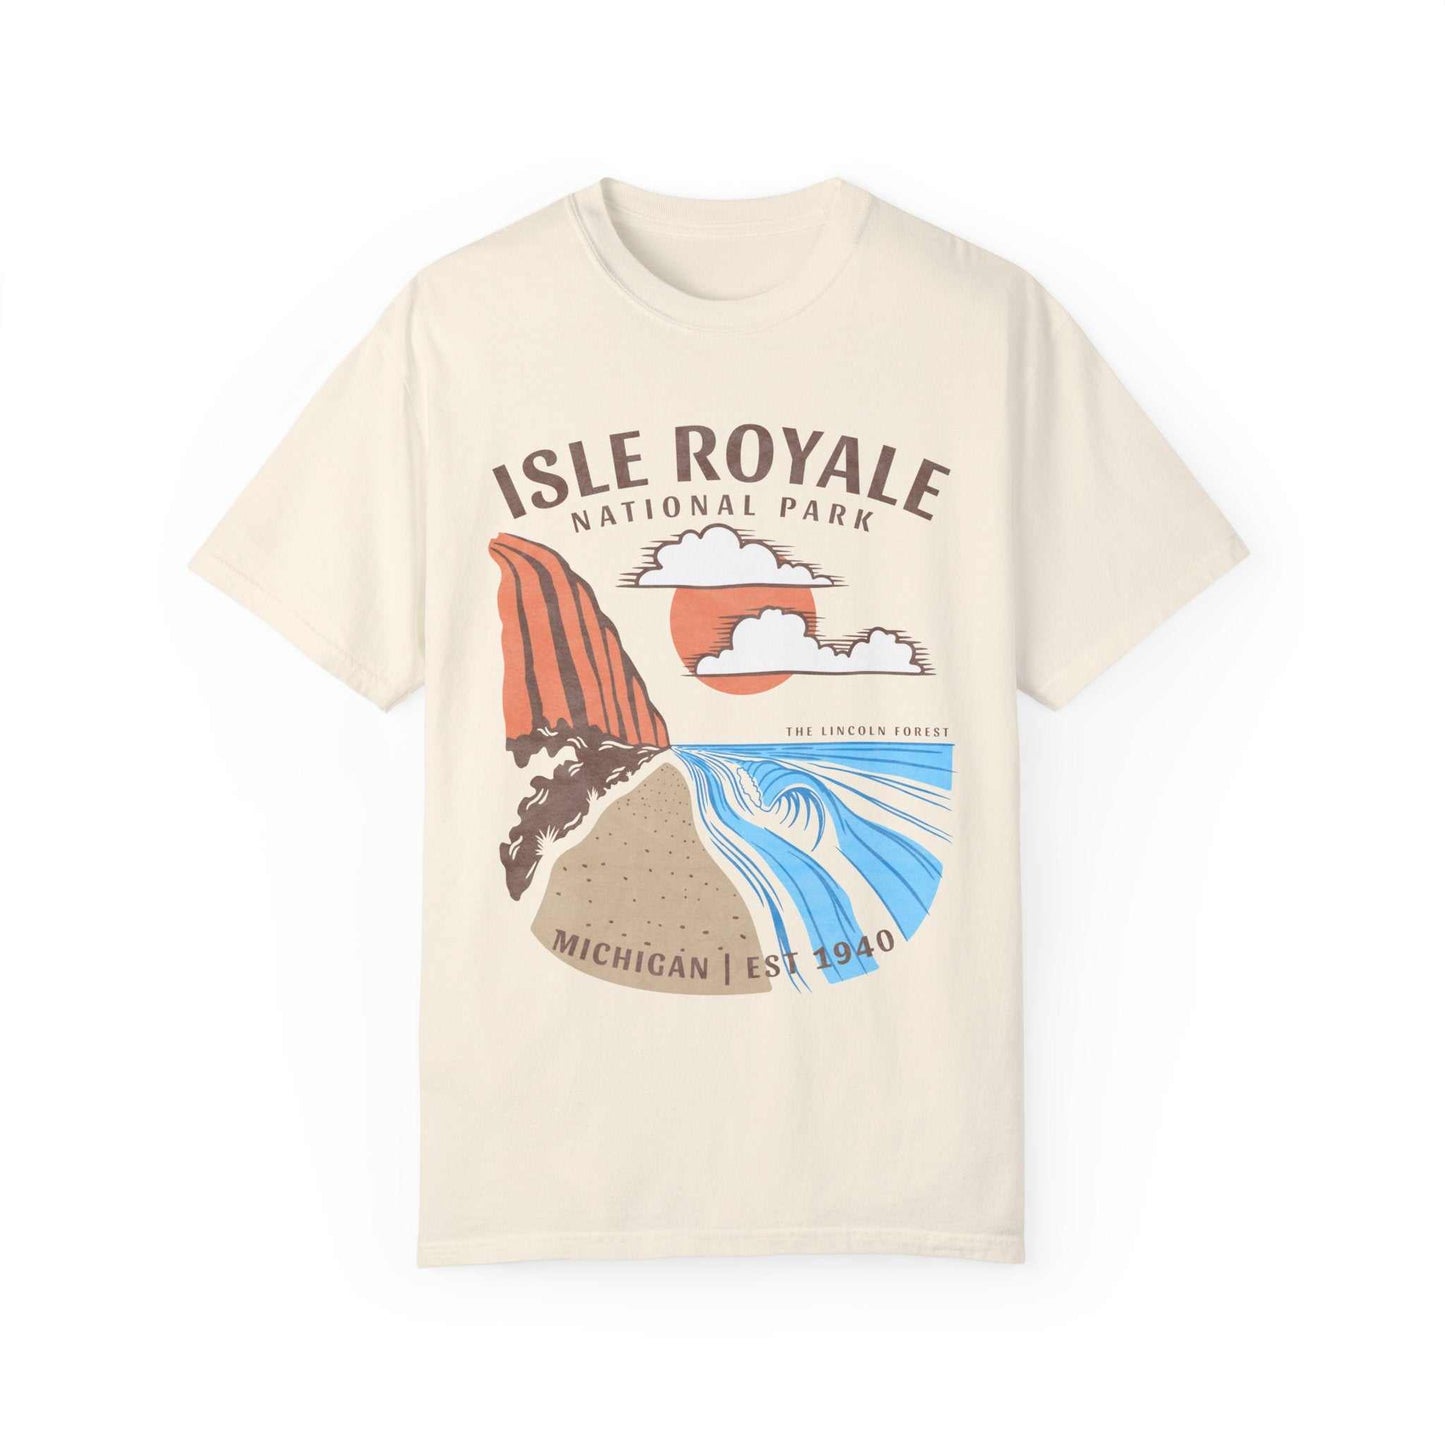 Isle Royale National Park ShirtDetails:
- 100% jersey cotton - light weight ultra soft fabric - unisex sizing
The Lincoln Forest cares deeply about the planet and creating a business that gives ba